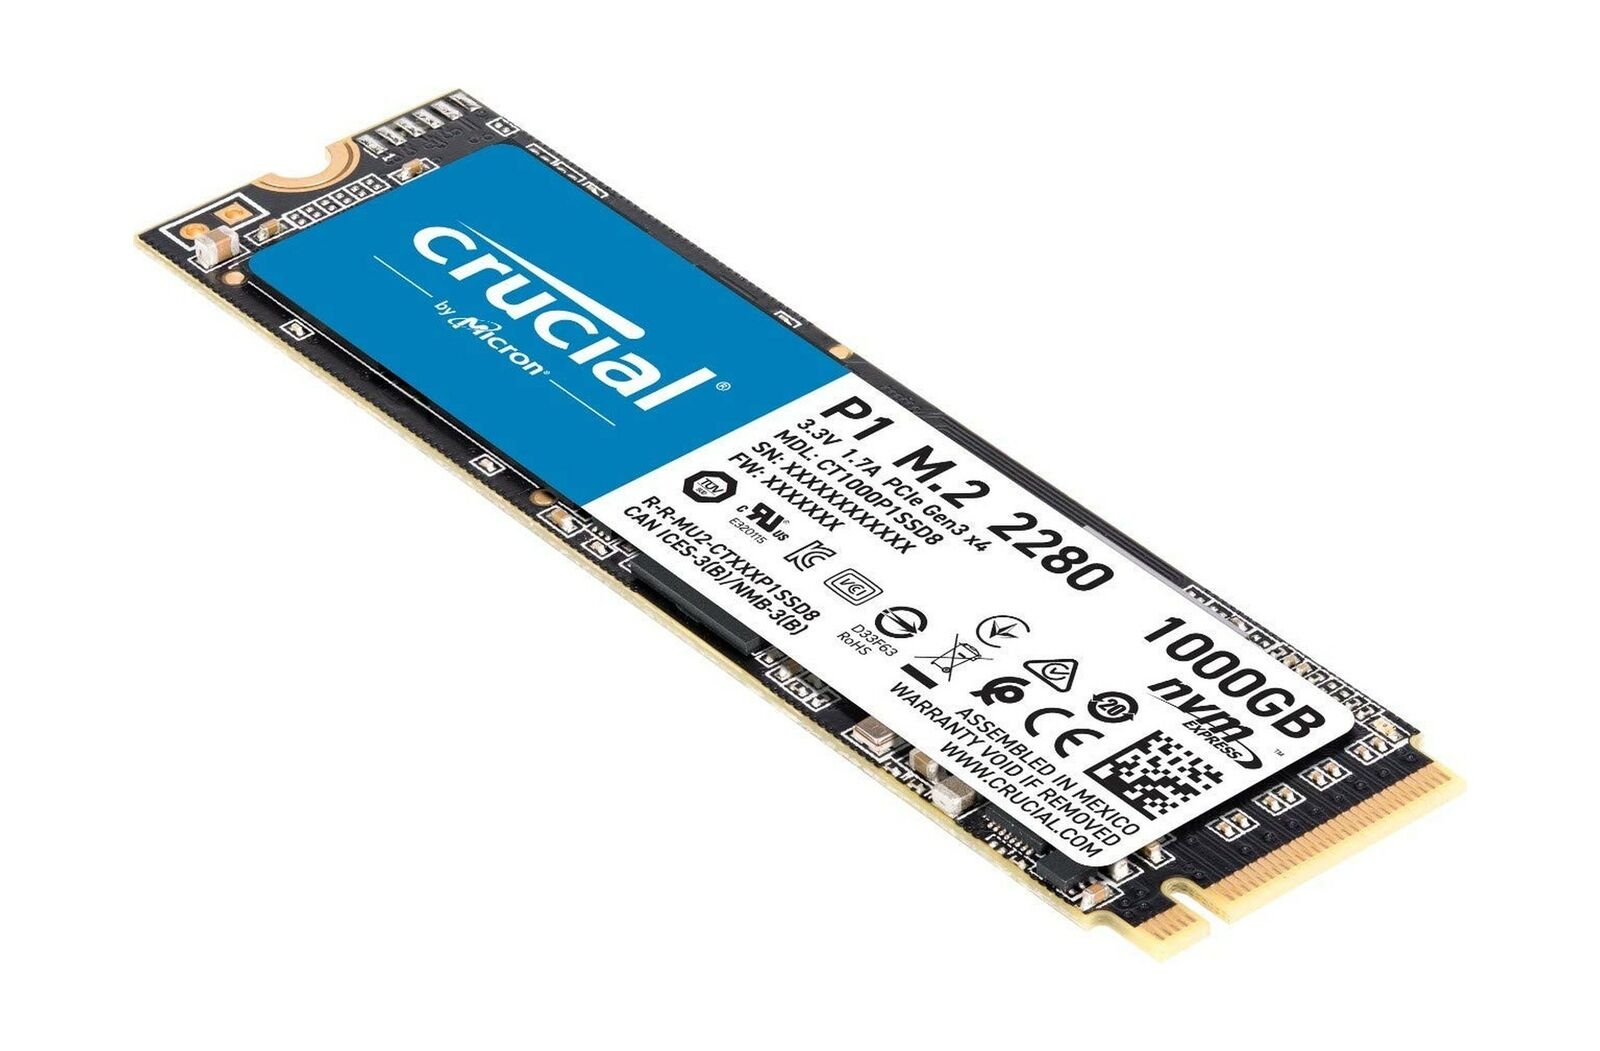 Crucial P1 1TB 3D NAND NVMe PCIe Internal SSD, up to 2000MB/s - CT1000P1SSD8 - image 2 of 2